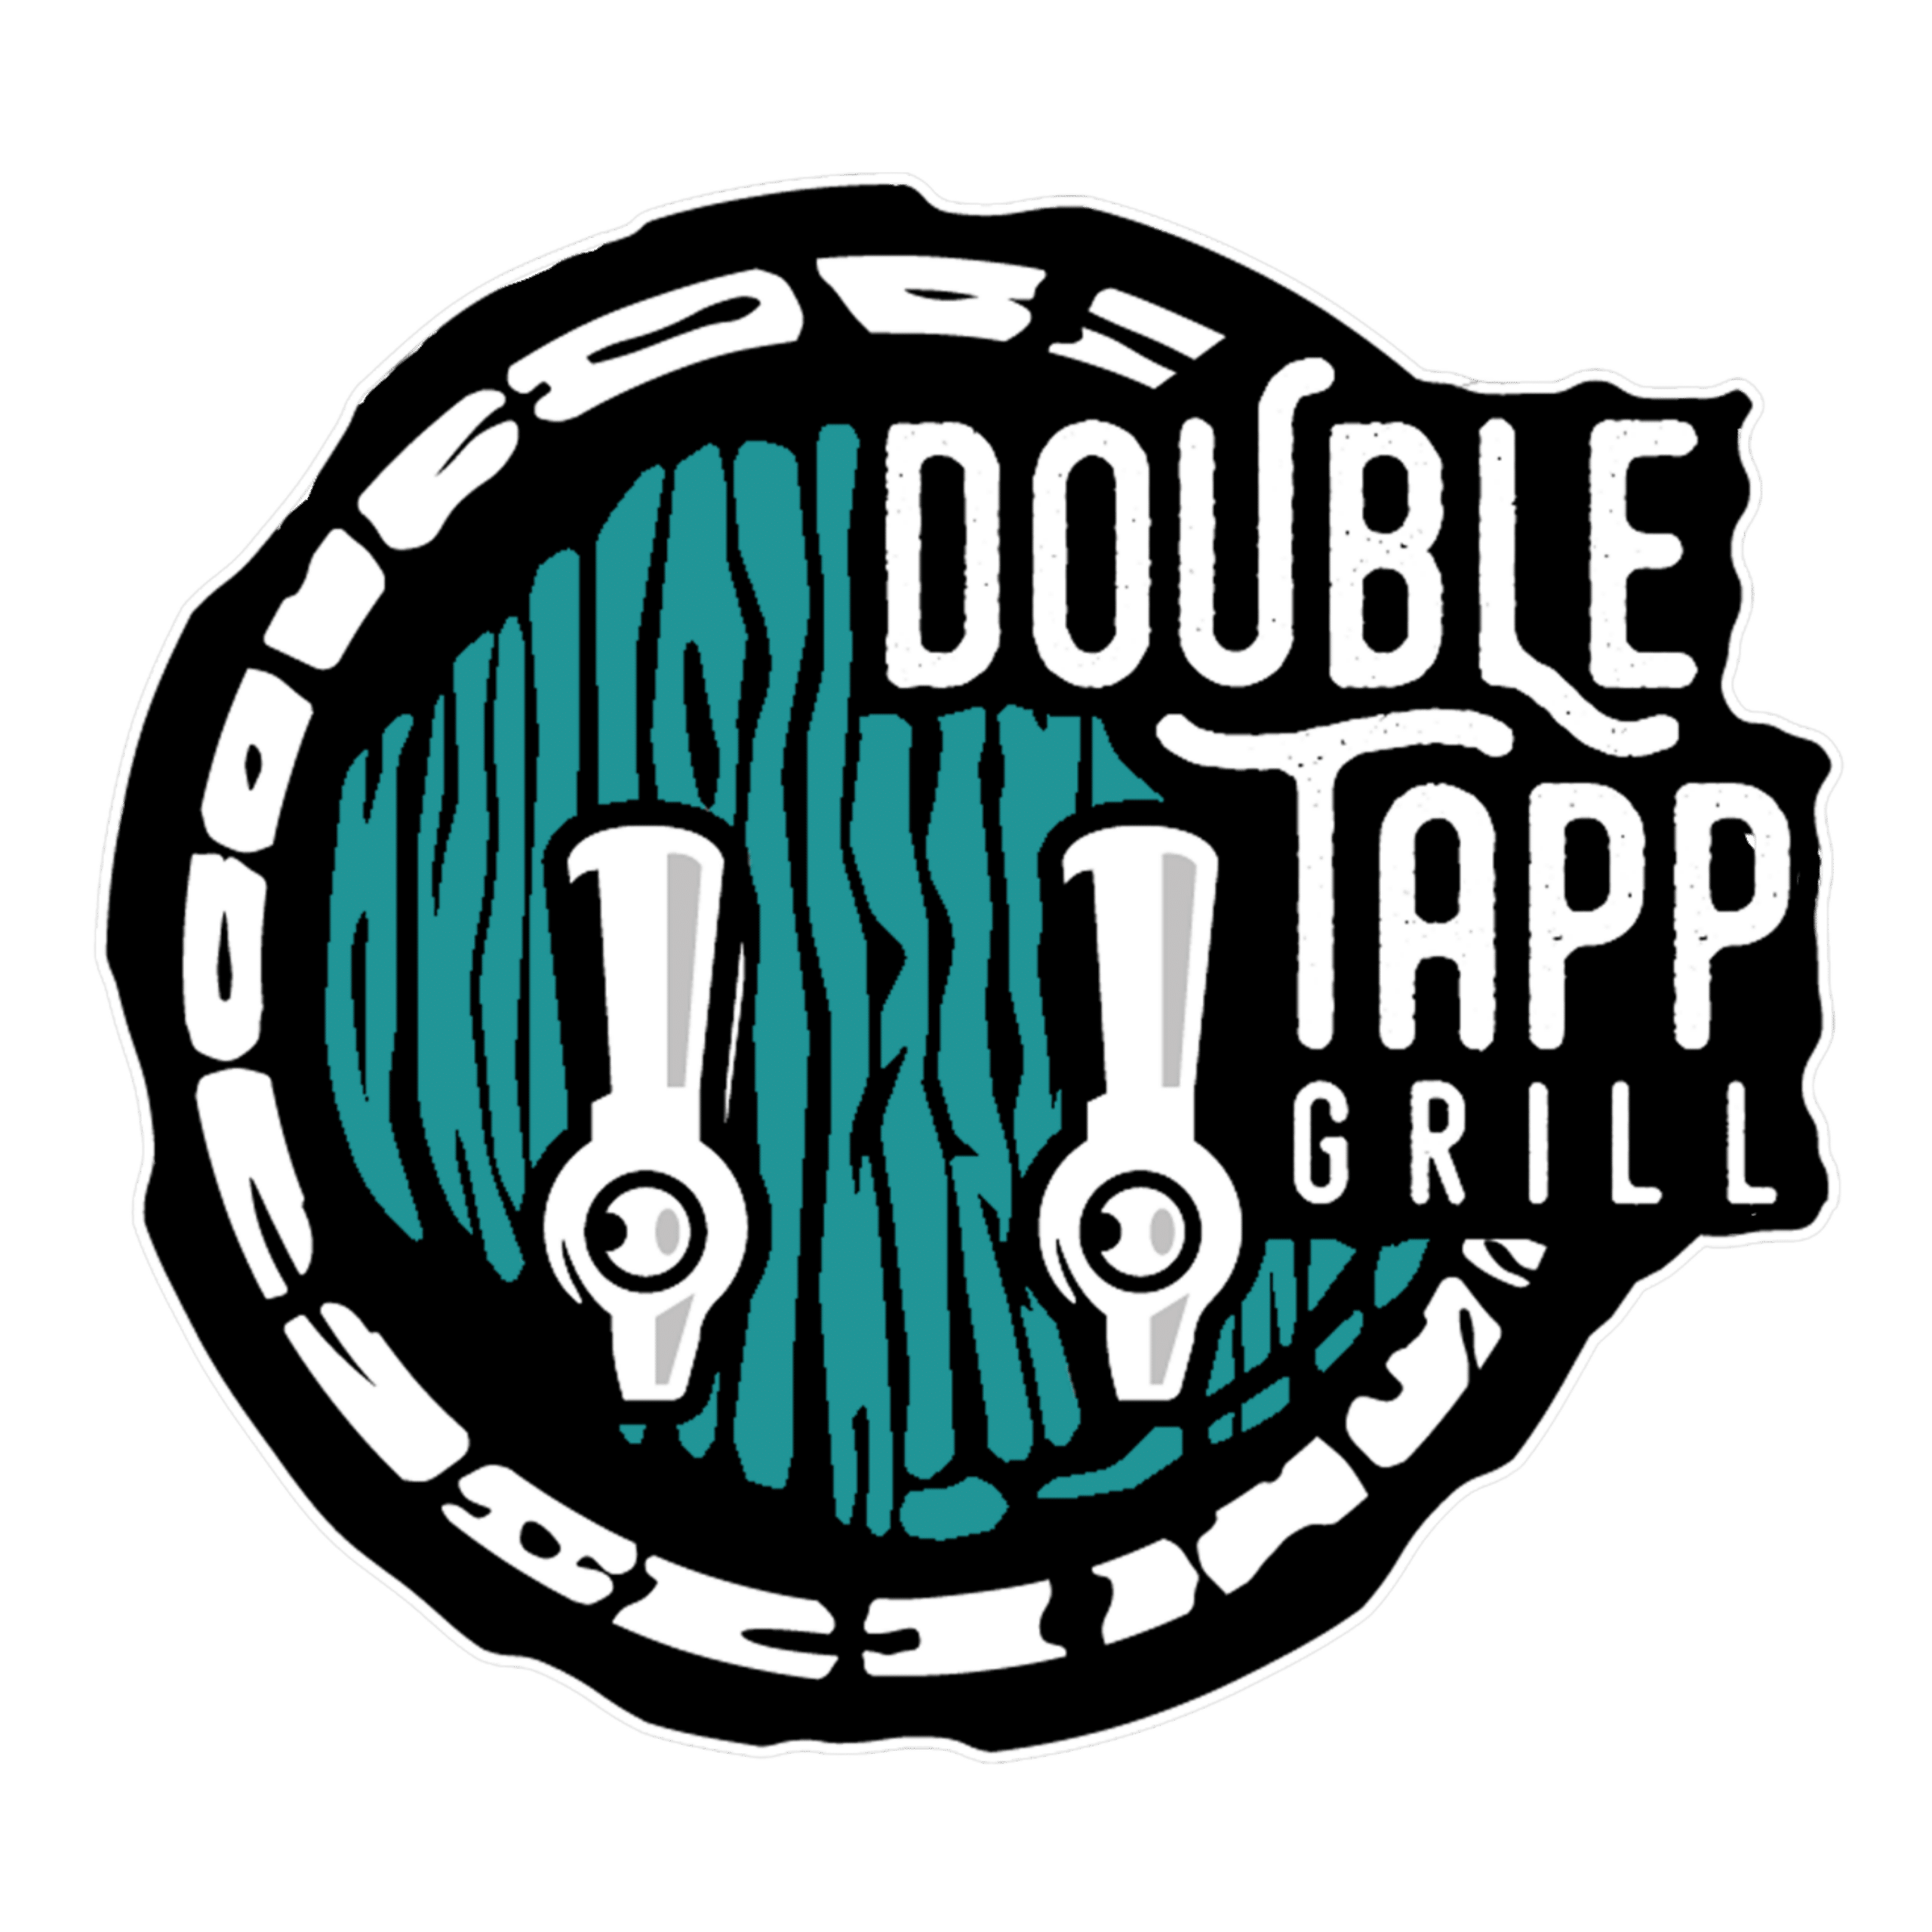 Double Tapp Grill Menu, High Quality Ingredients, Hometown Atmosphere.